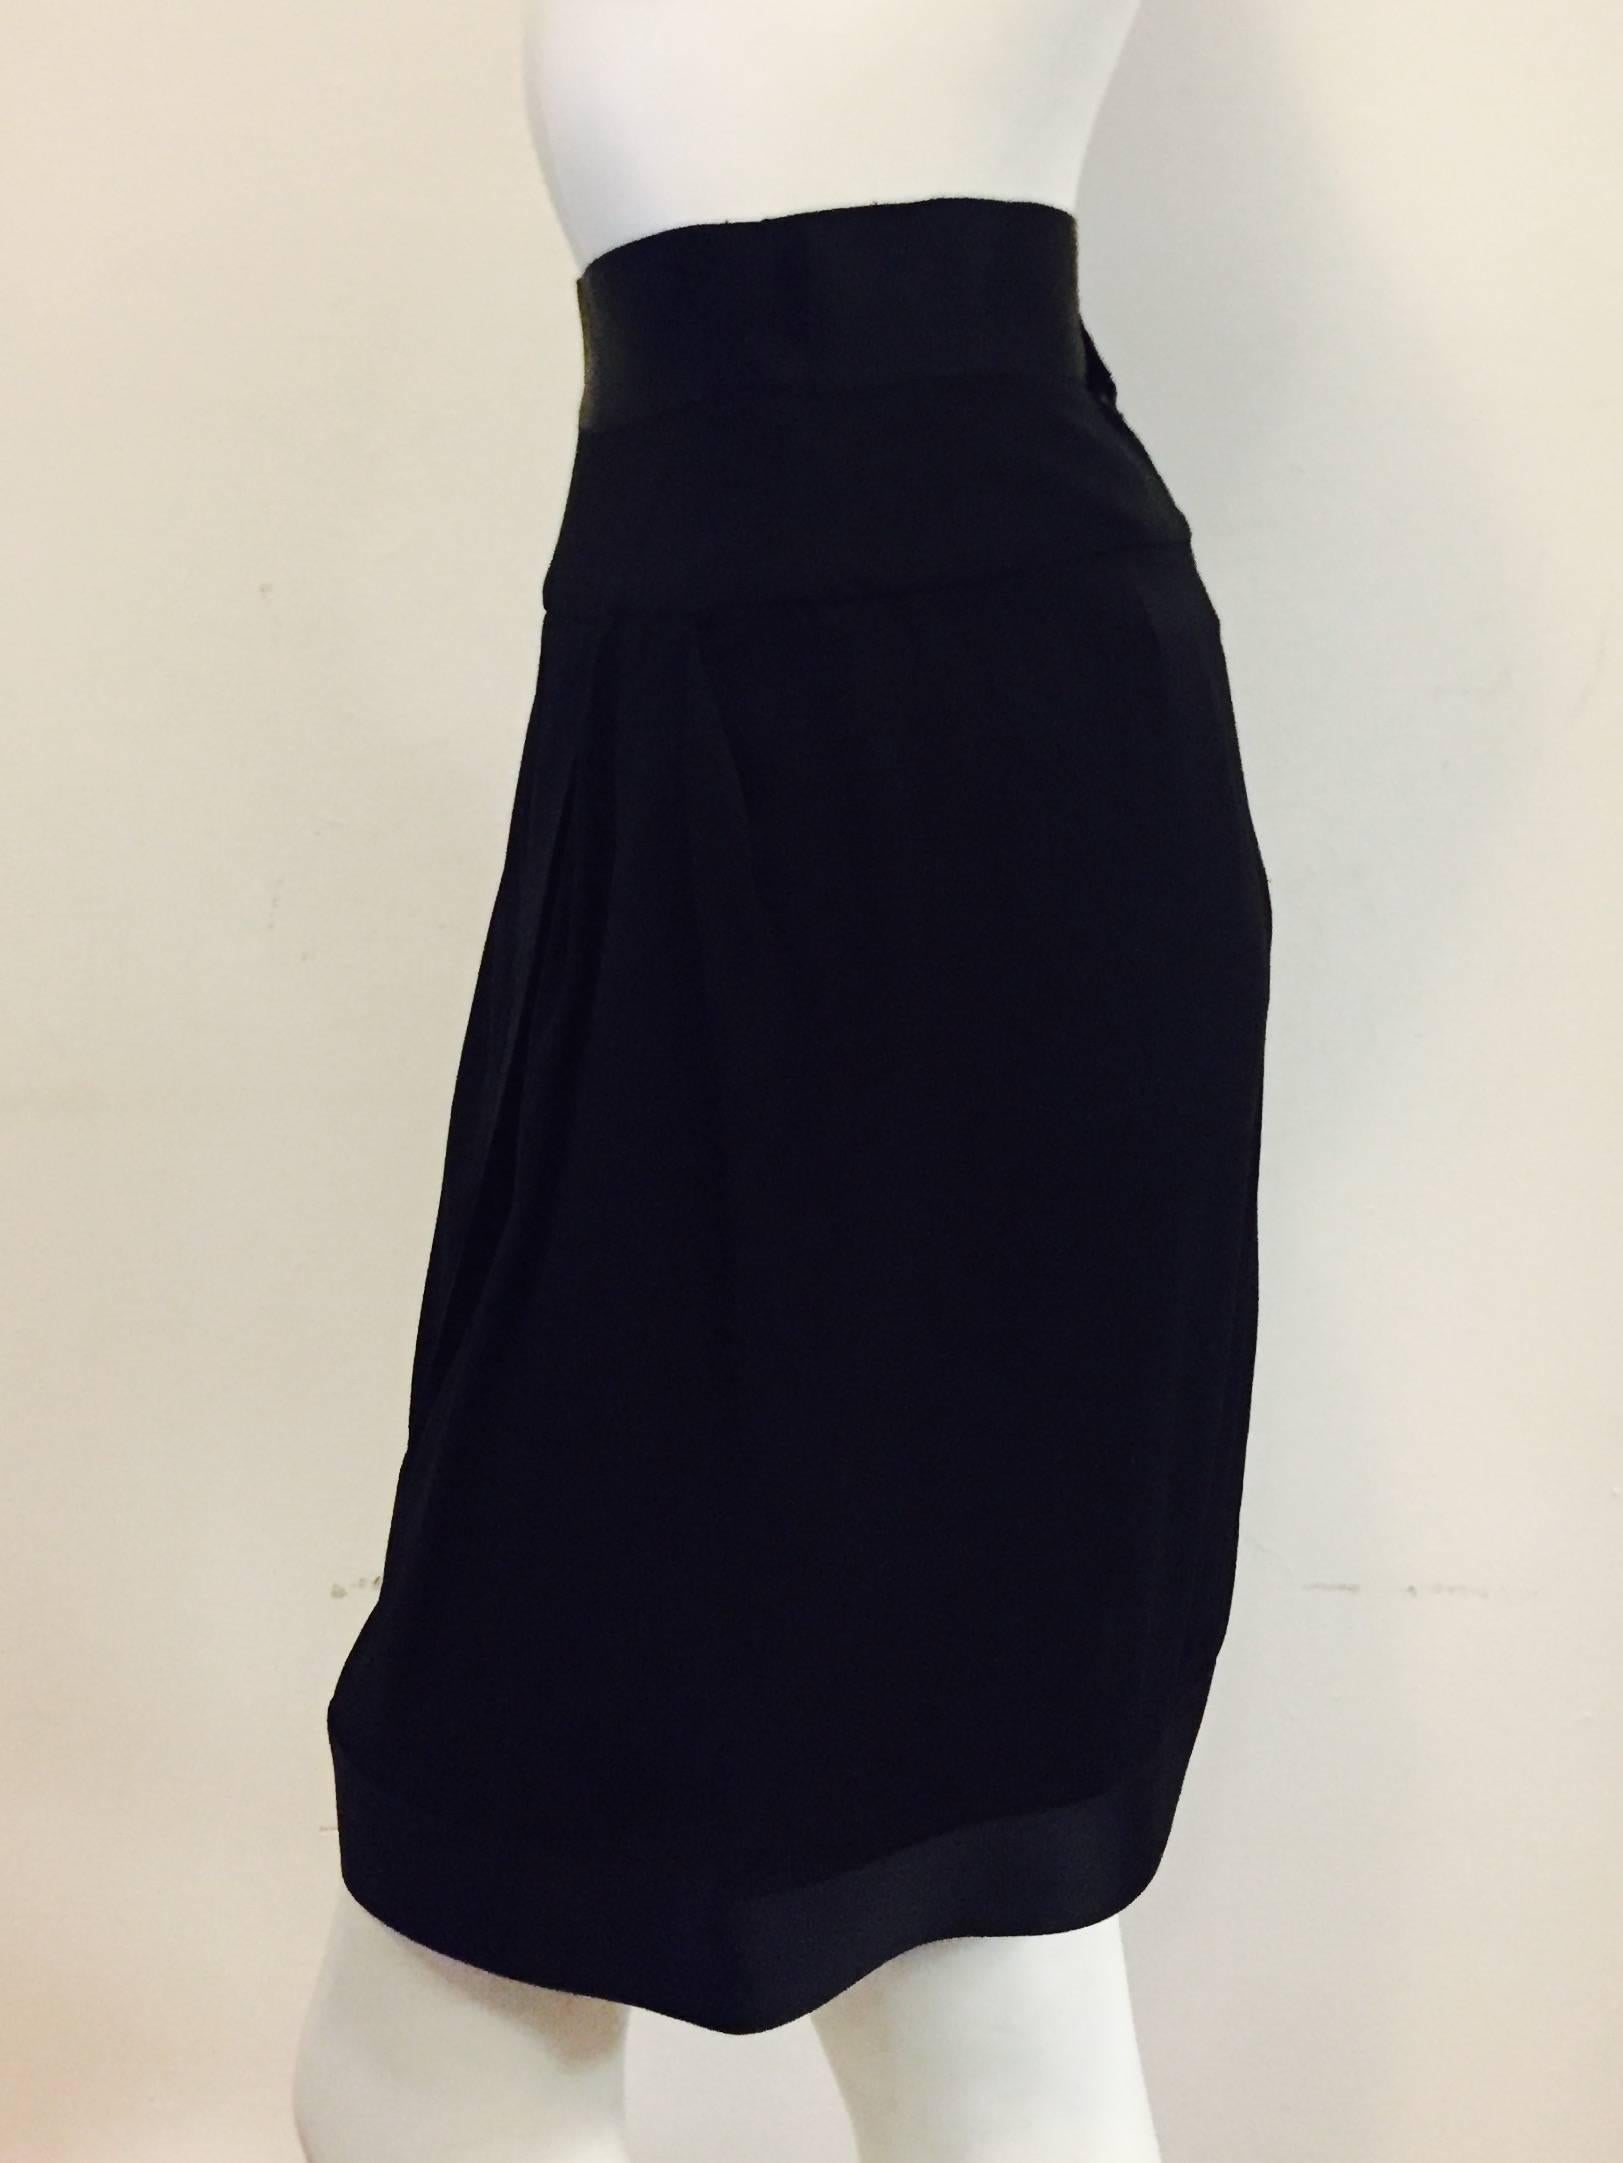 Chanel Boutique Black Silk Evening Skirt With Silk Satin Banded Trim 1